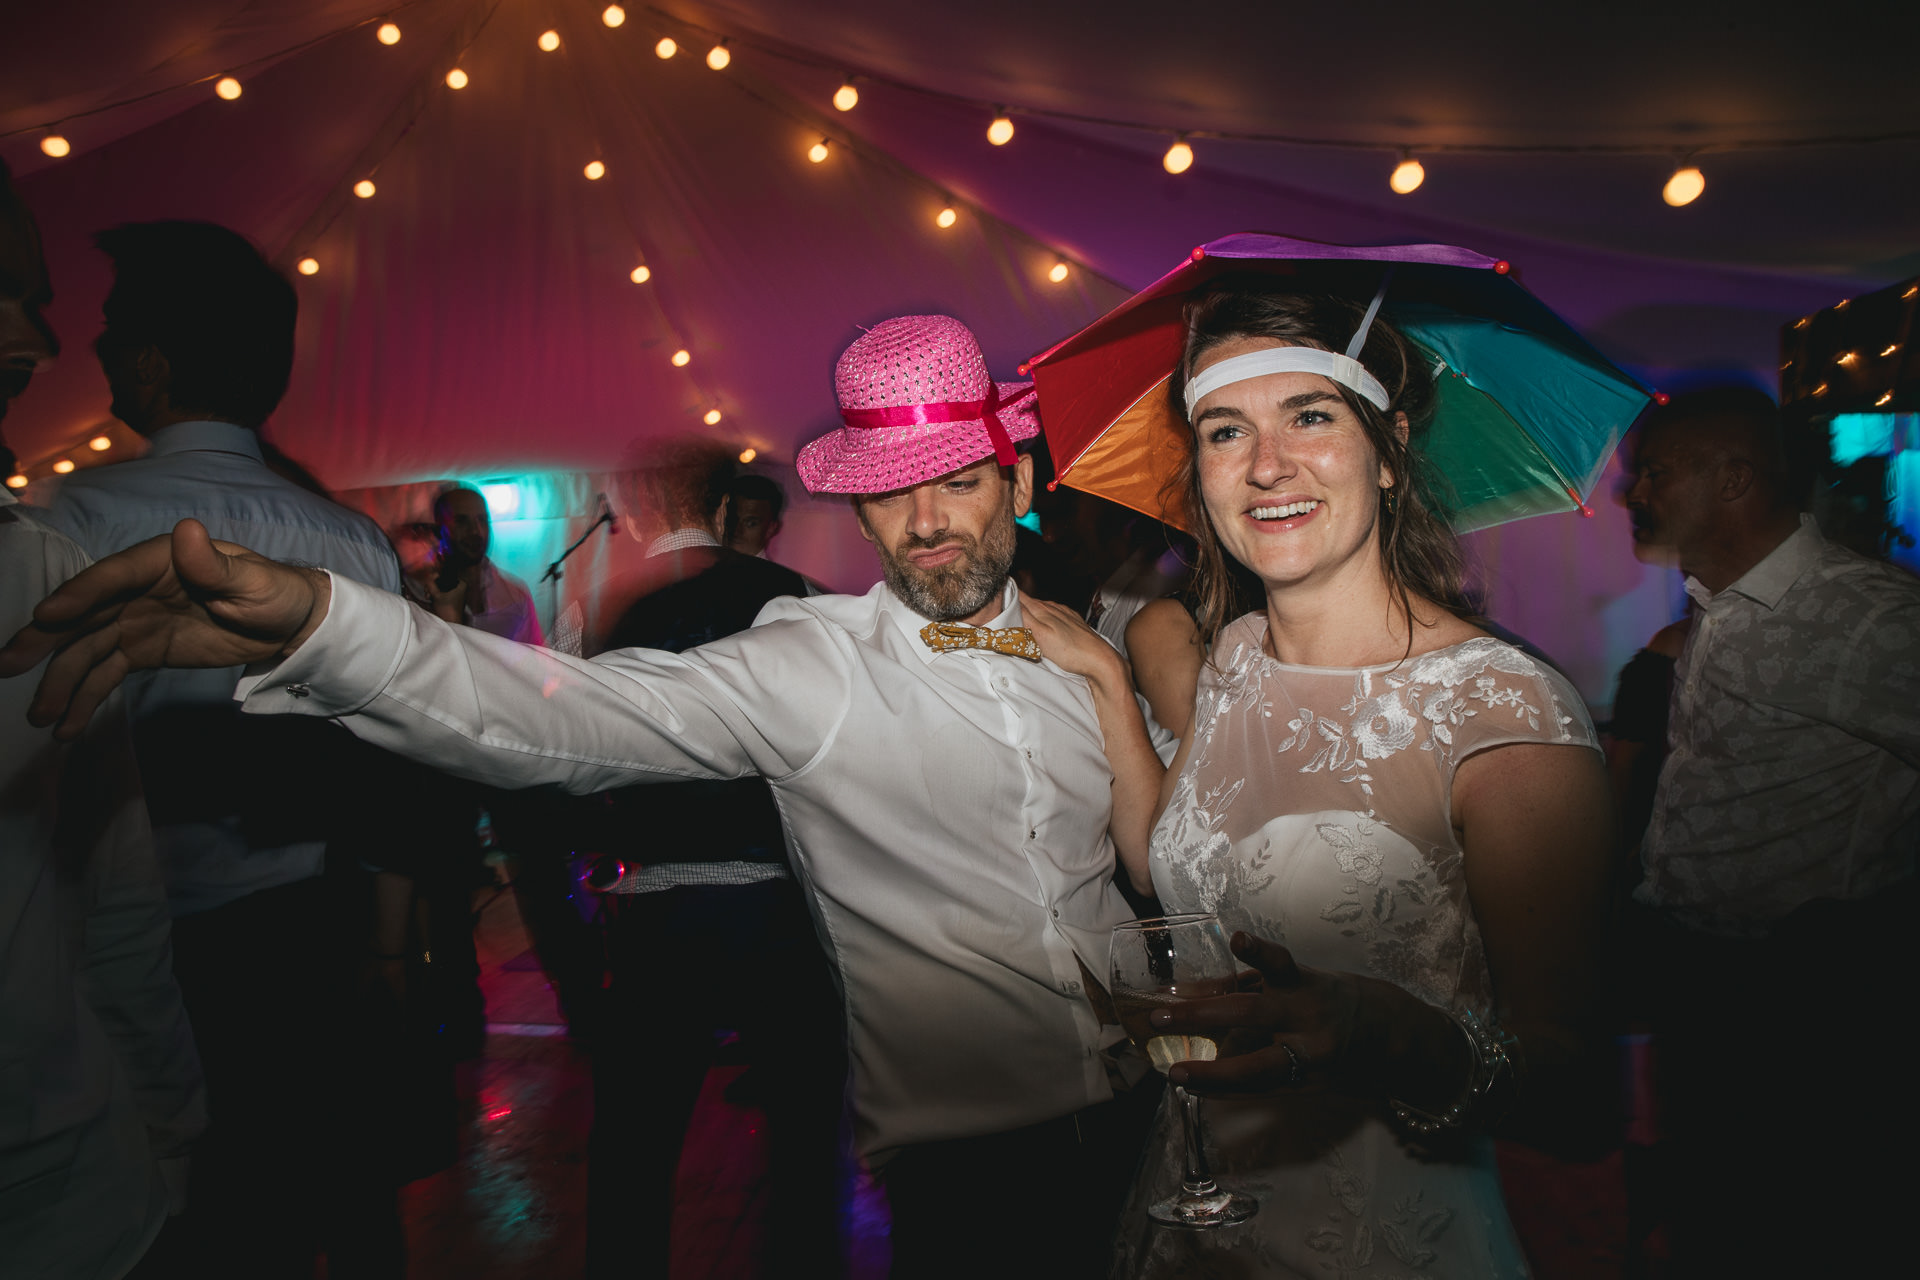 Bride and groom wearing silly hats on a dancefloor